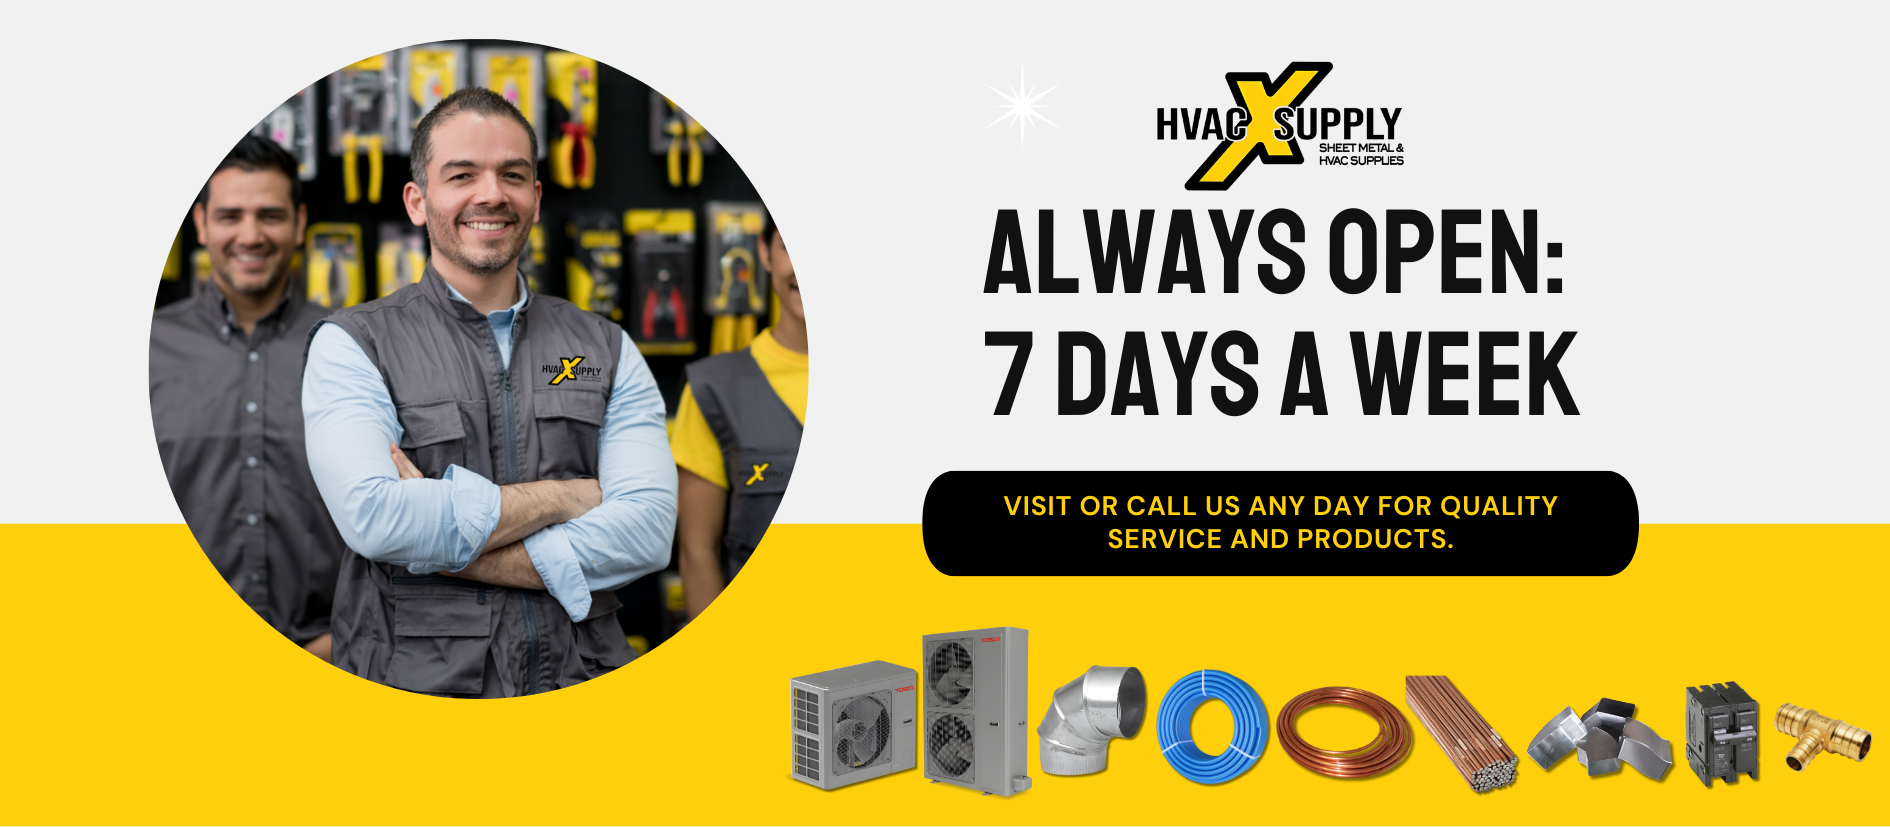 Assorted HVAC products including copper coil, Tosot heat pump, R410A refrigerant, non-toxic clear vinyl tubing, and metal sheet displayed with the text 'Always Open: 7 Days a Week - Visit or call us any day for quality service and products' alongside the HVAC X Supply logo.